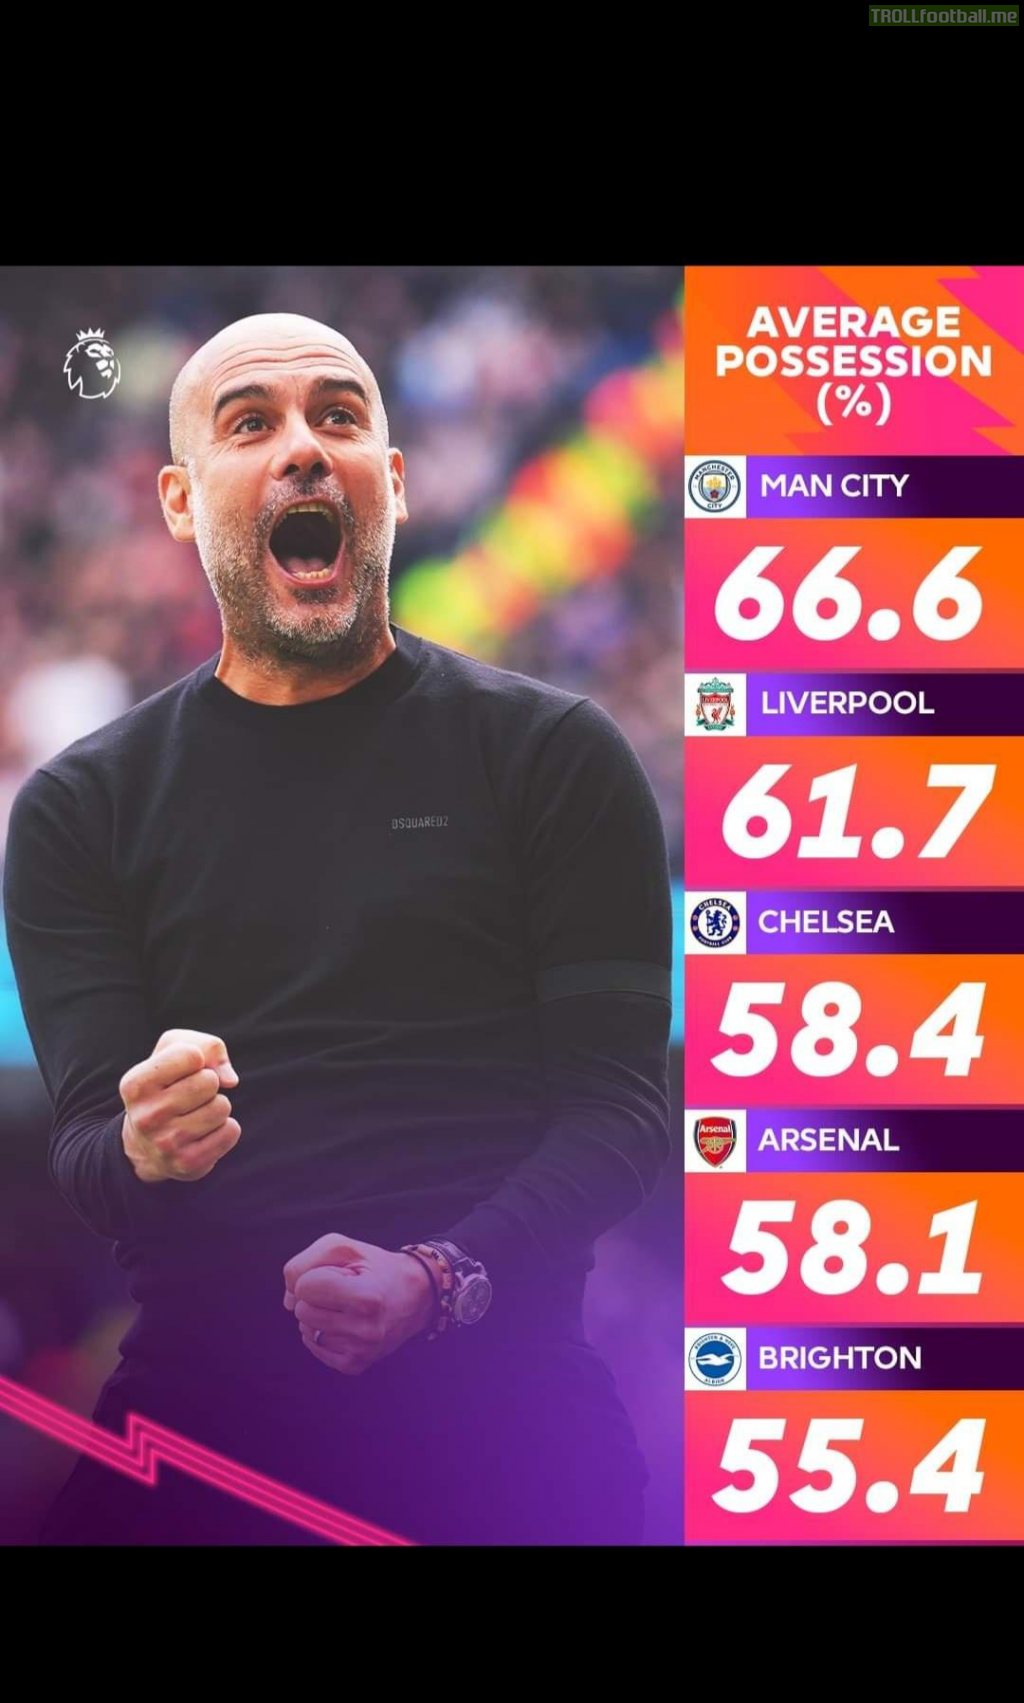 Average Possession during this season in Premier league